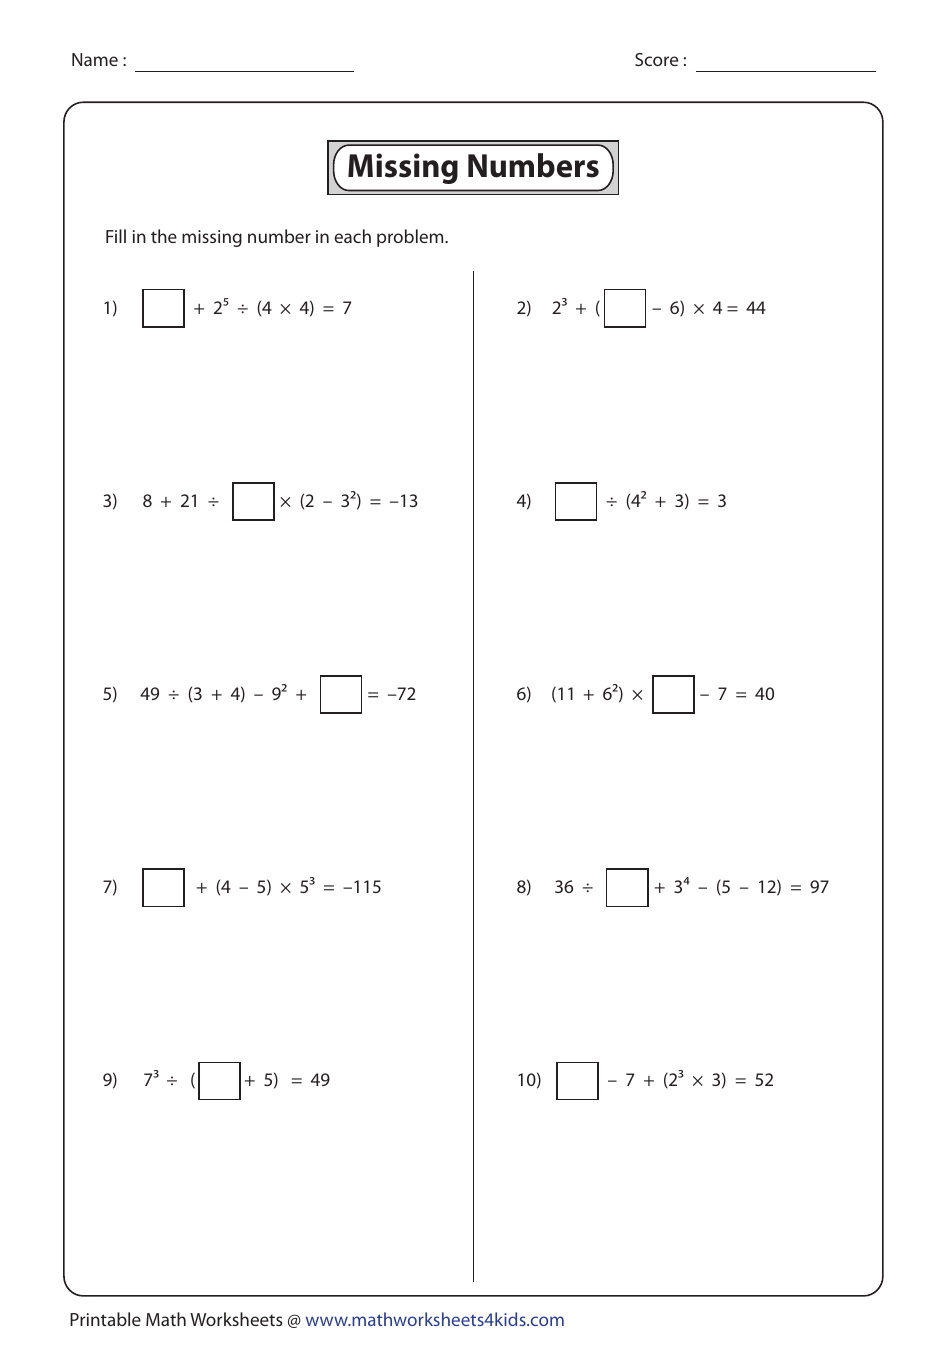 Missing Numbers Order of Operations Worksheet - Preview Image